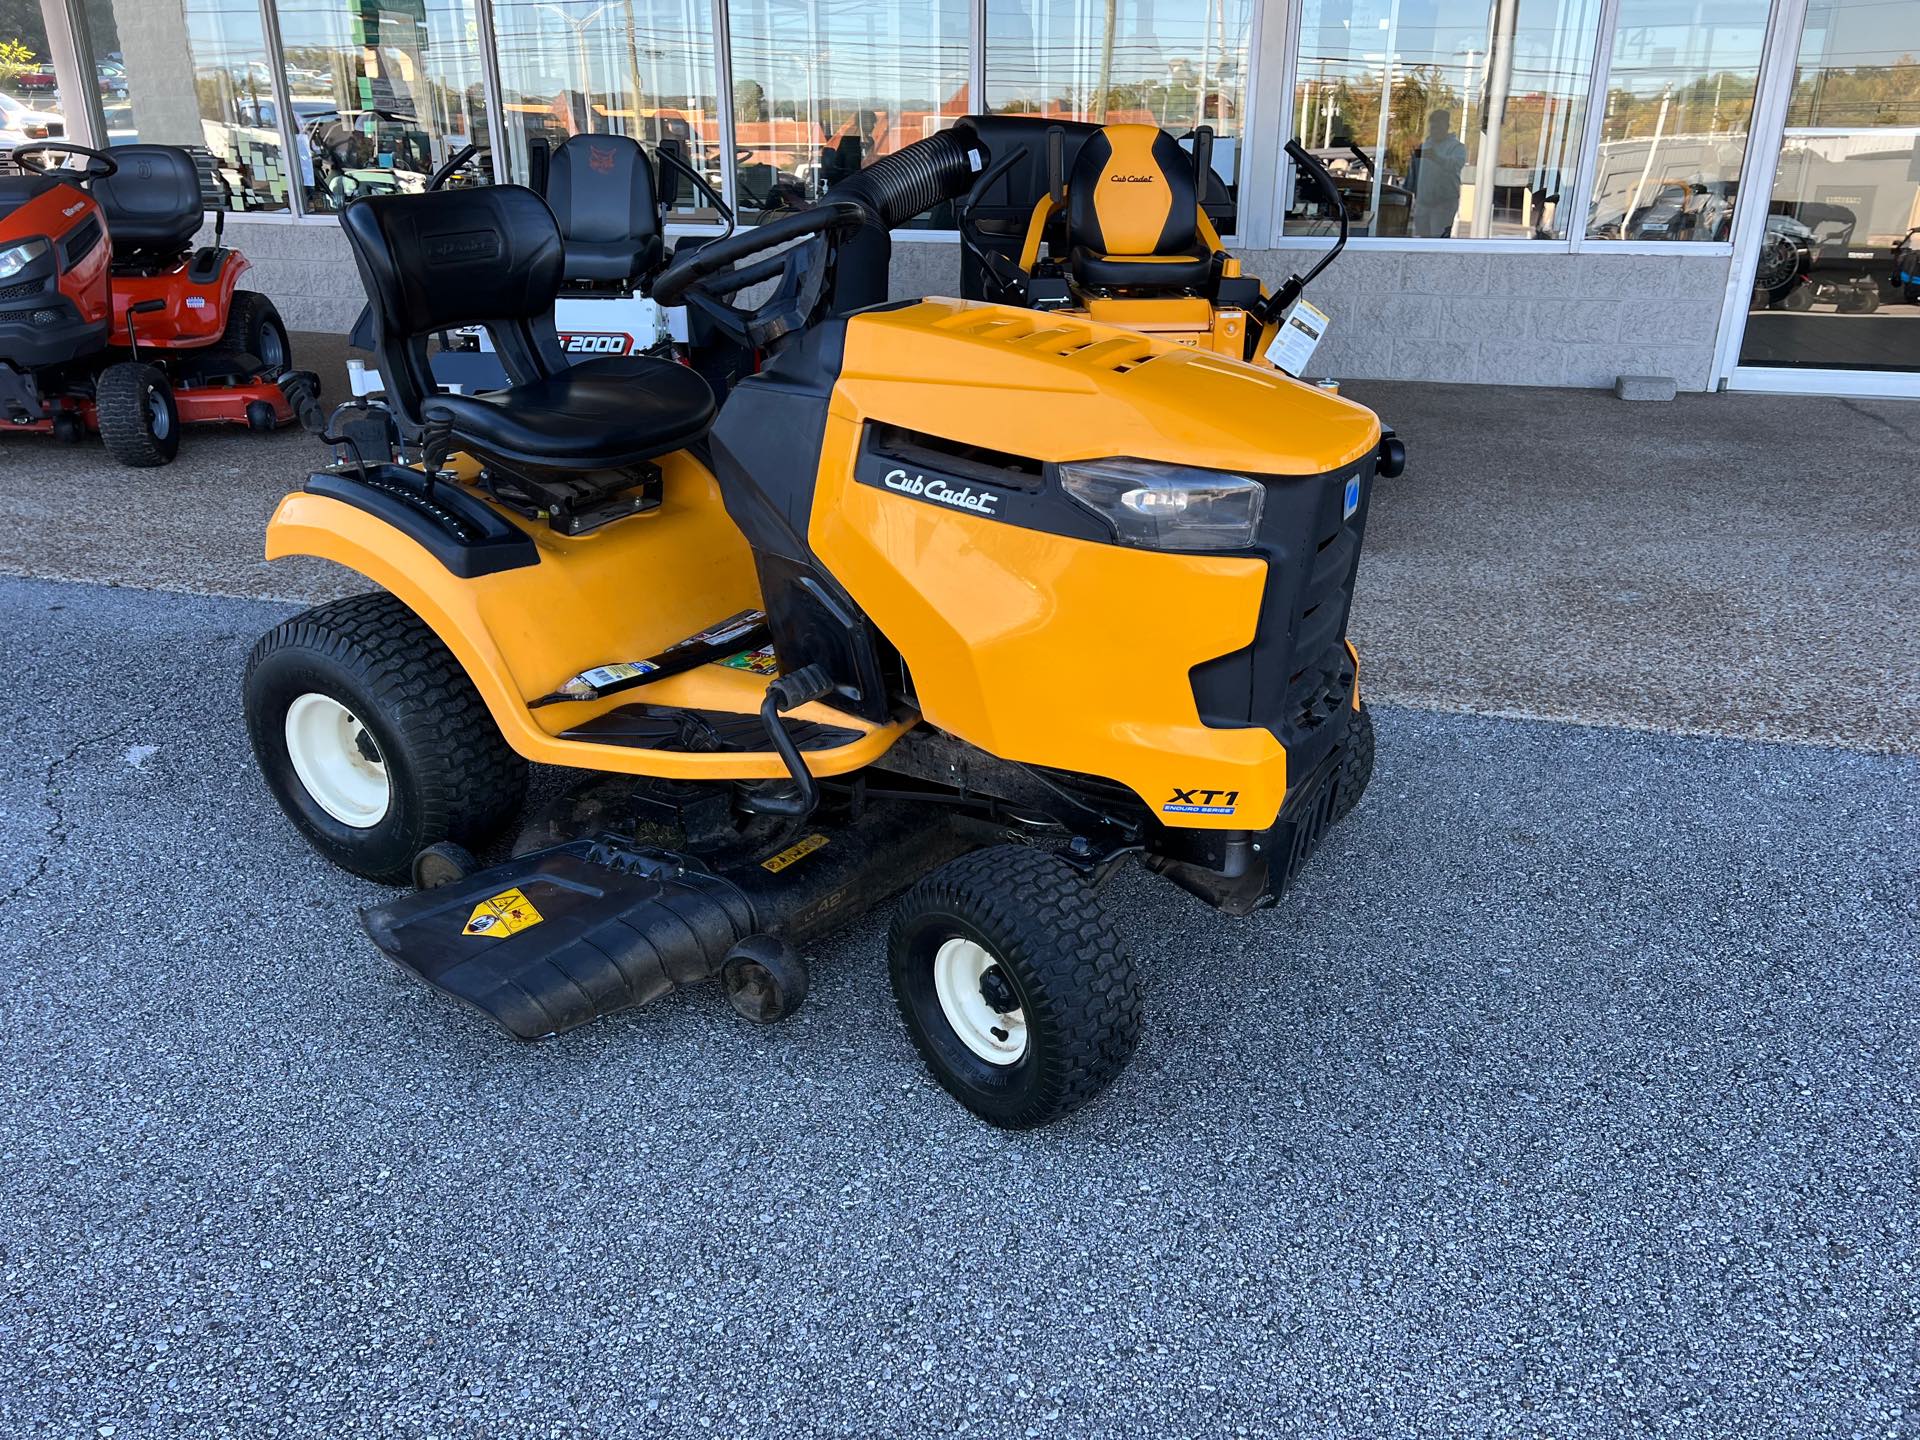 2017 CUB CADET LT 42 at Knoxville Powersports